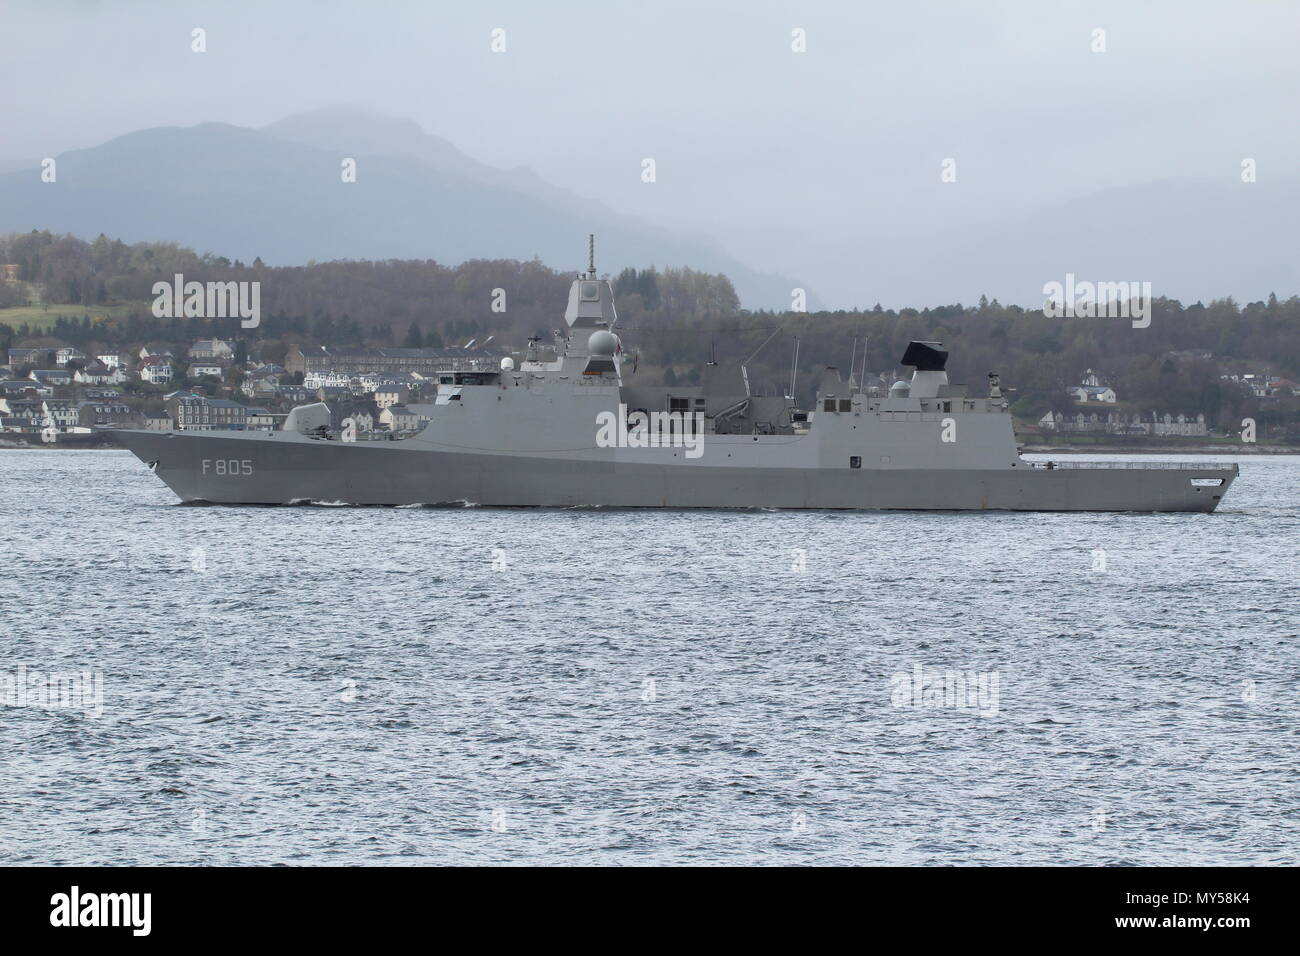 HNLMS Evertsen (F805), a De Zeven Provincien-class frigate operated by the Dutch Navy, passing Gourock at the start of Exercise Joint Warrior 18-1. Stock Photo